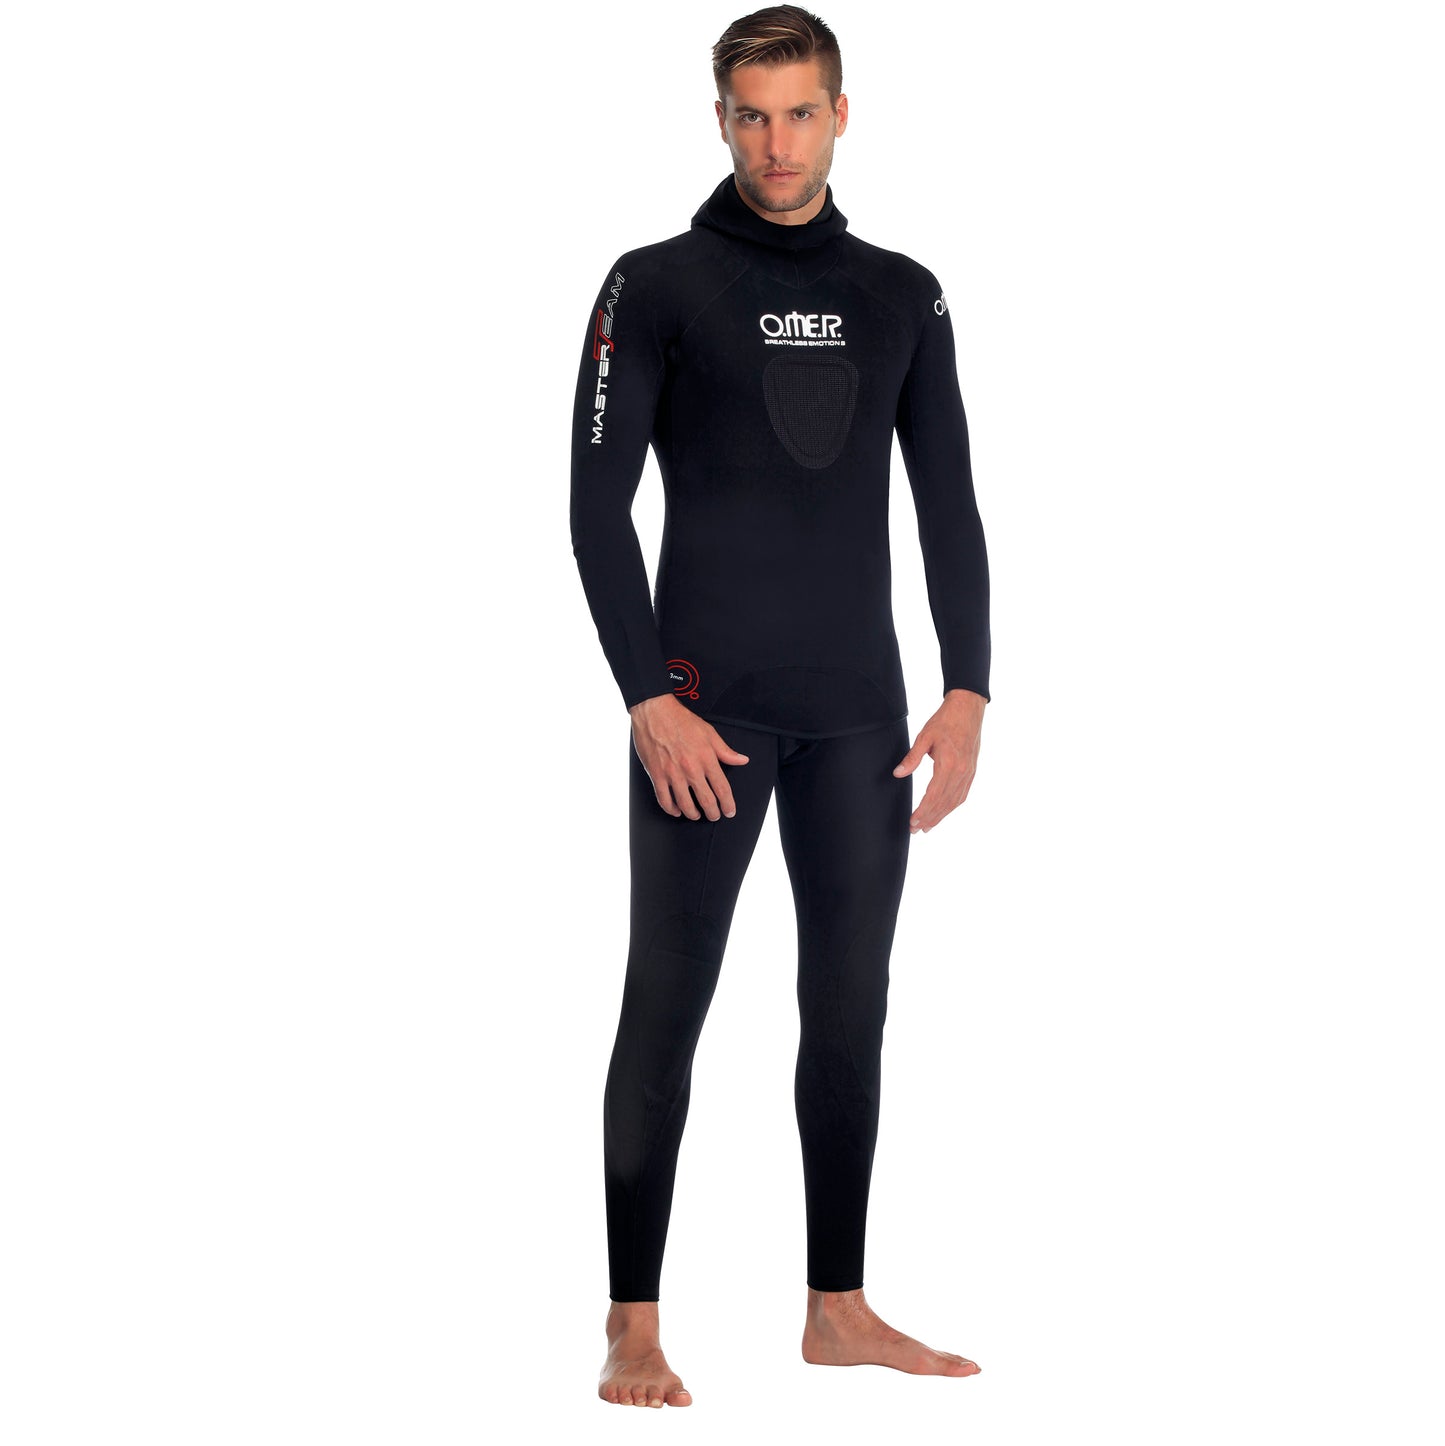 Omer Masterteam 7mm wetsuit size S and 3XL